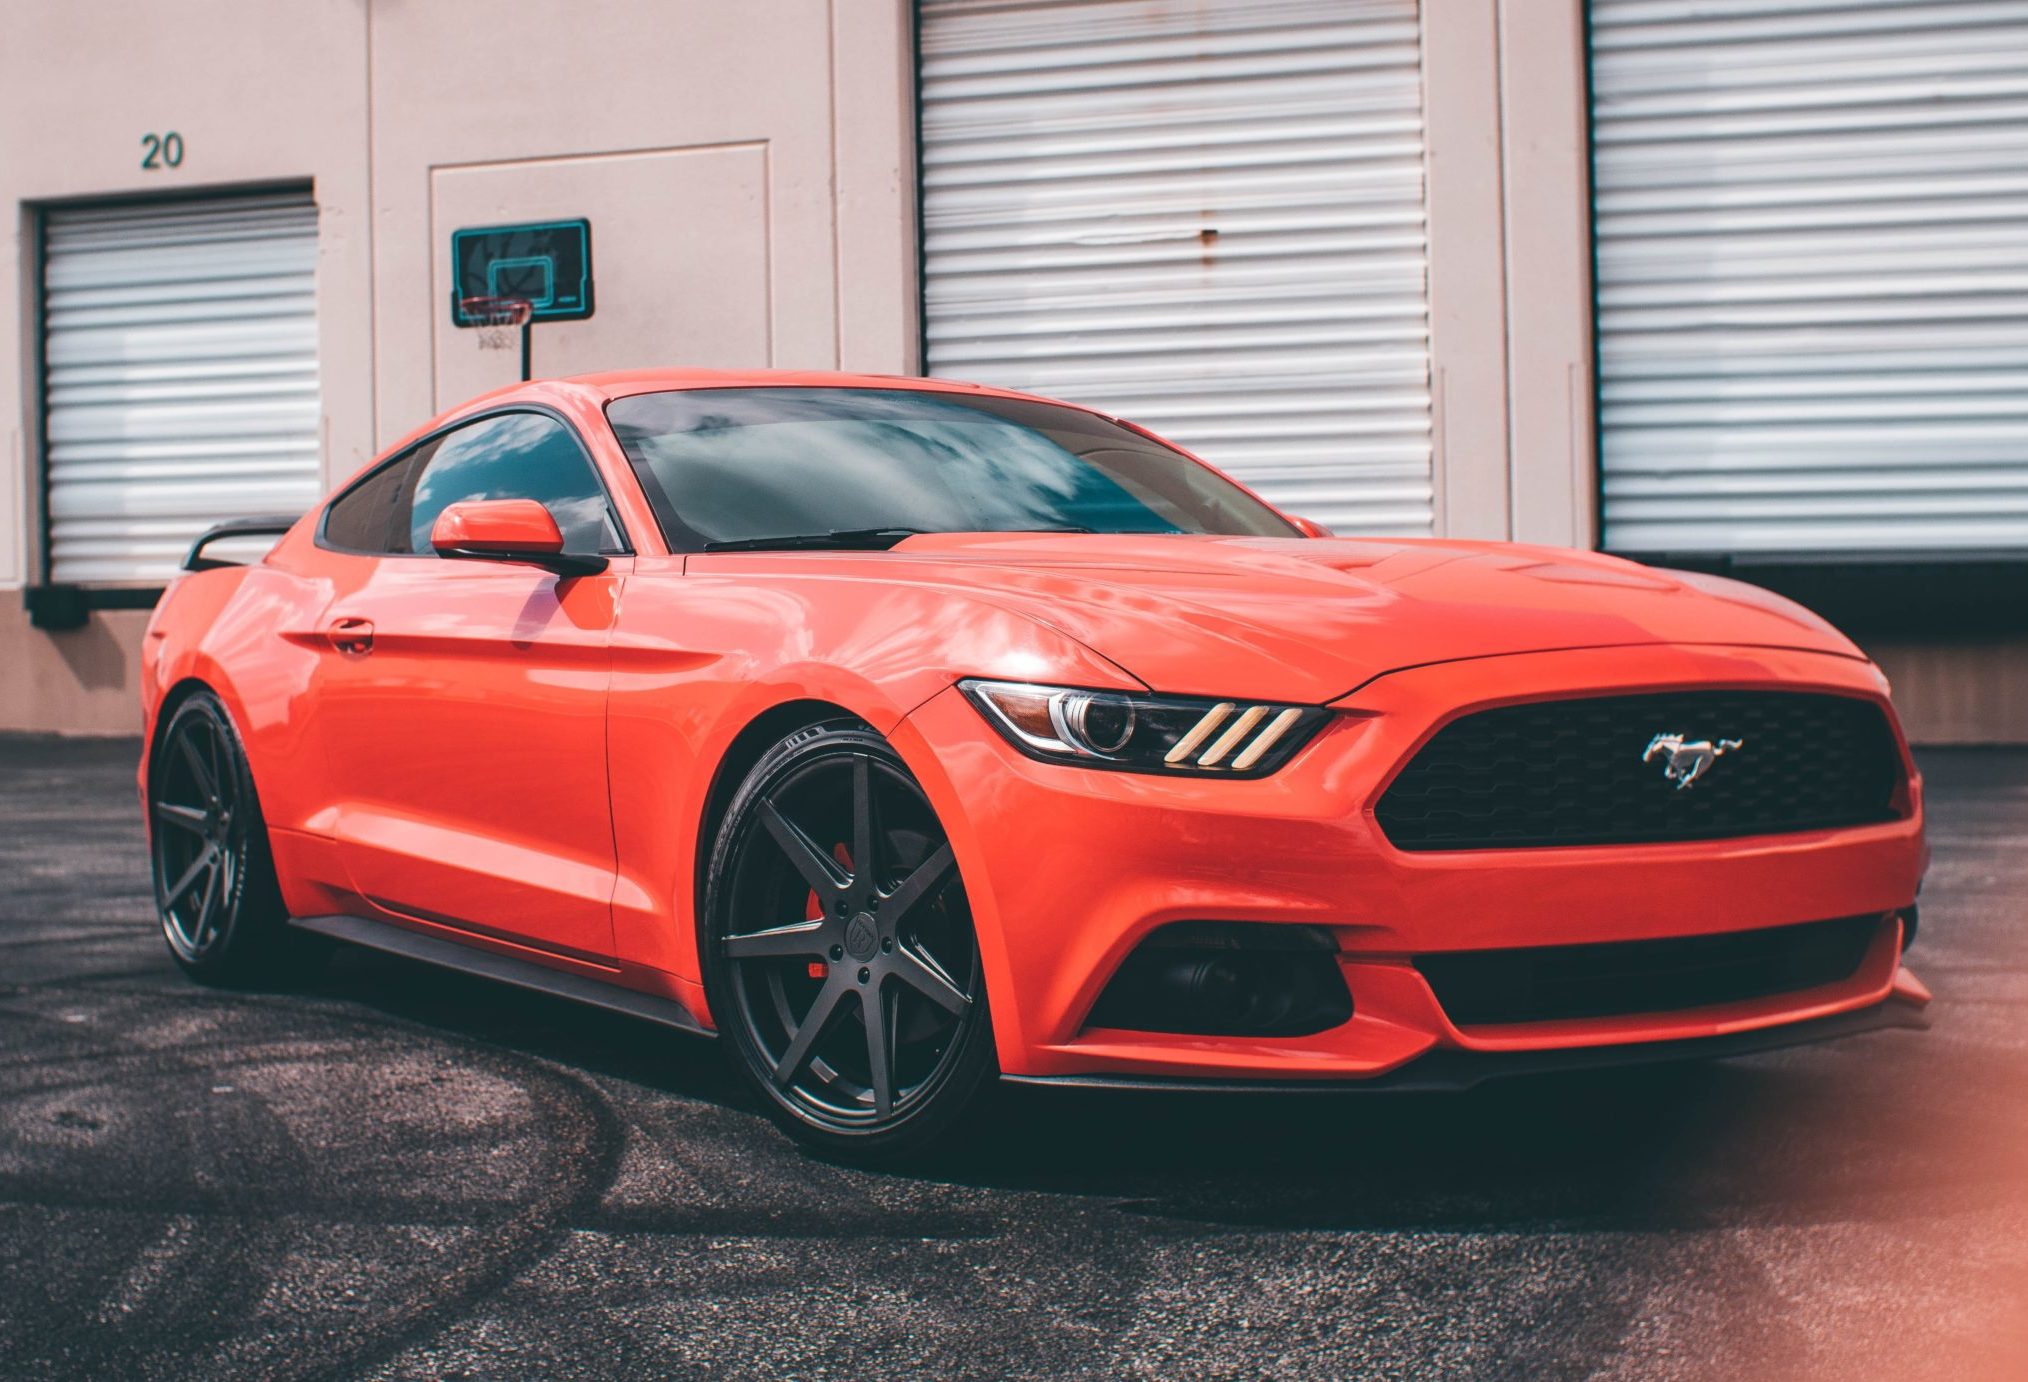 Ford Mustang parked.